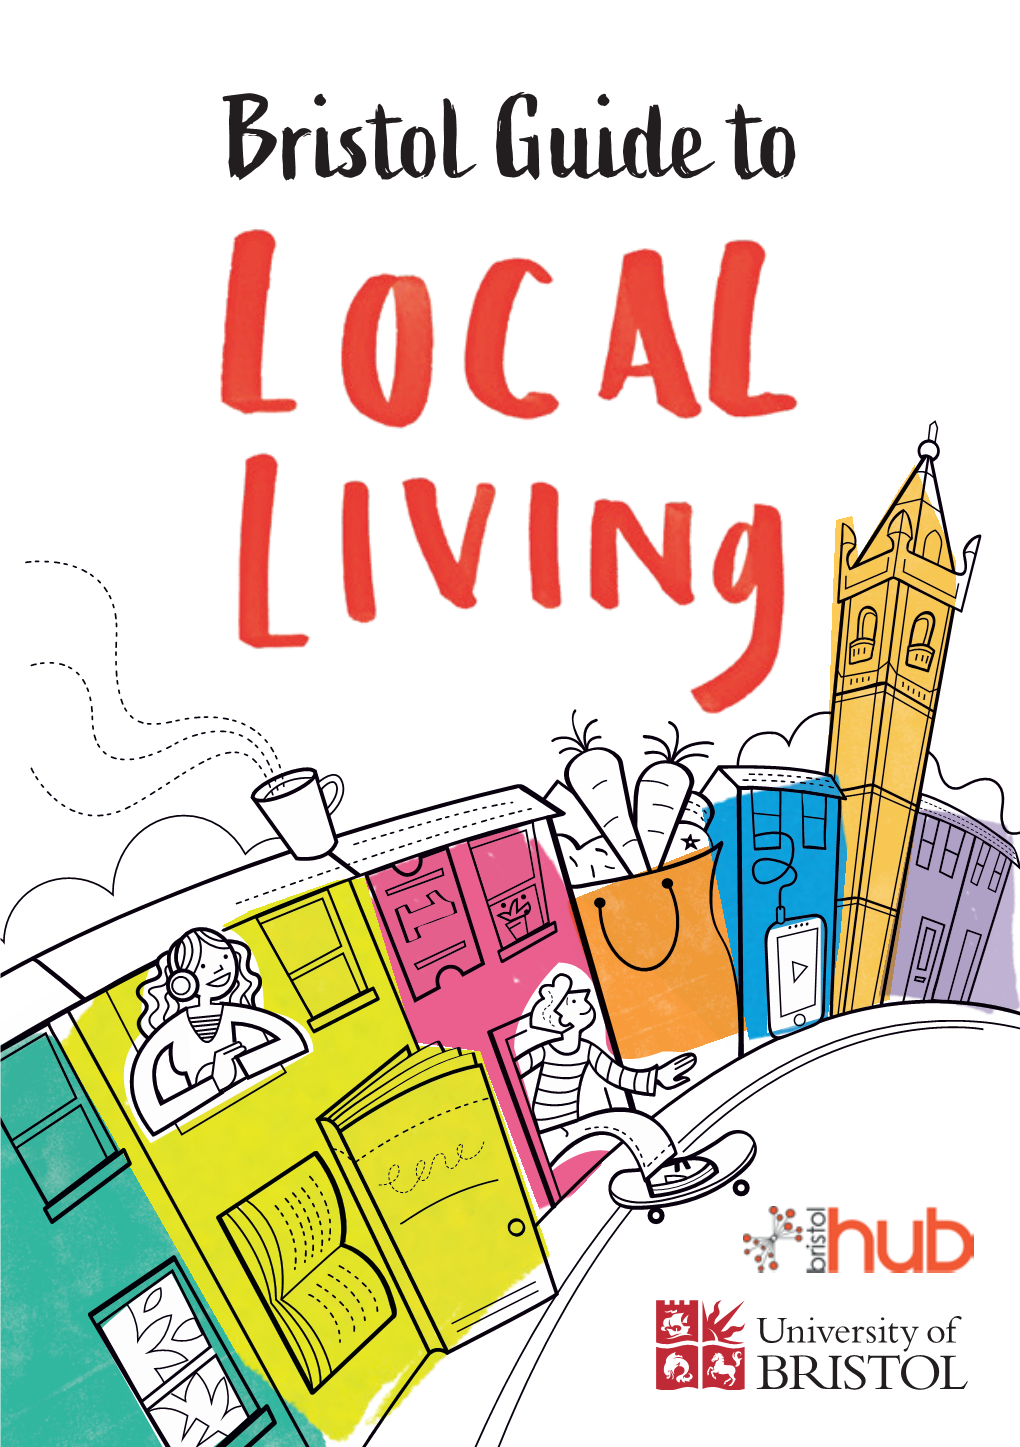 Bristol Guide to Local Living